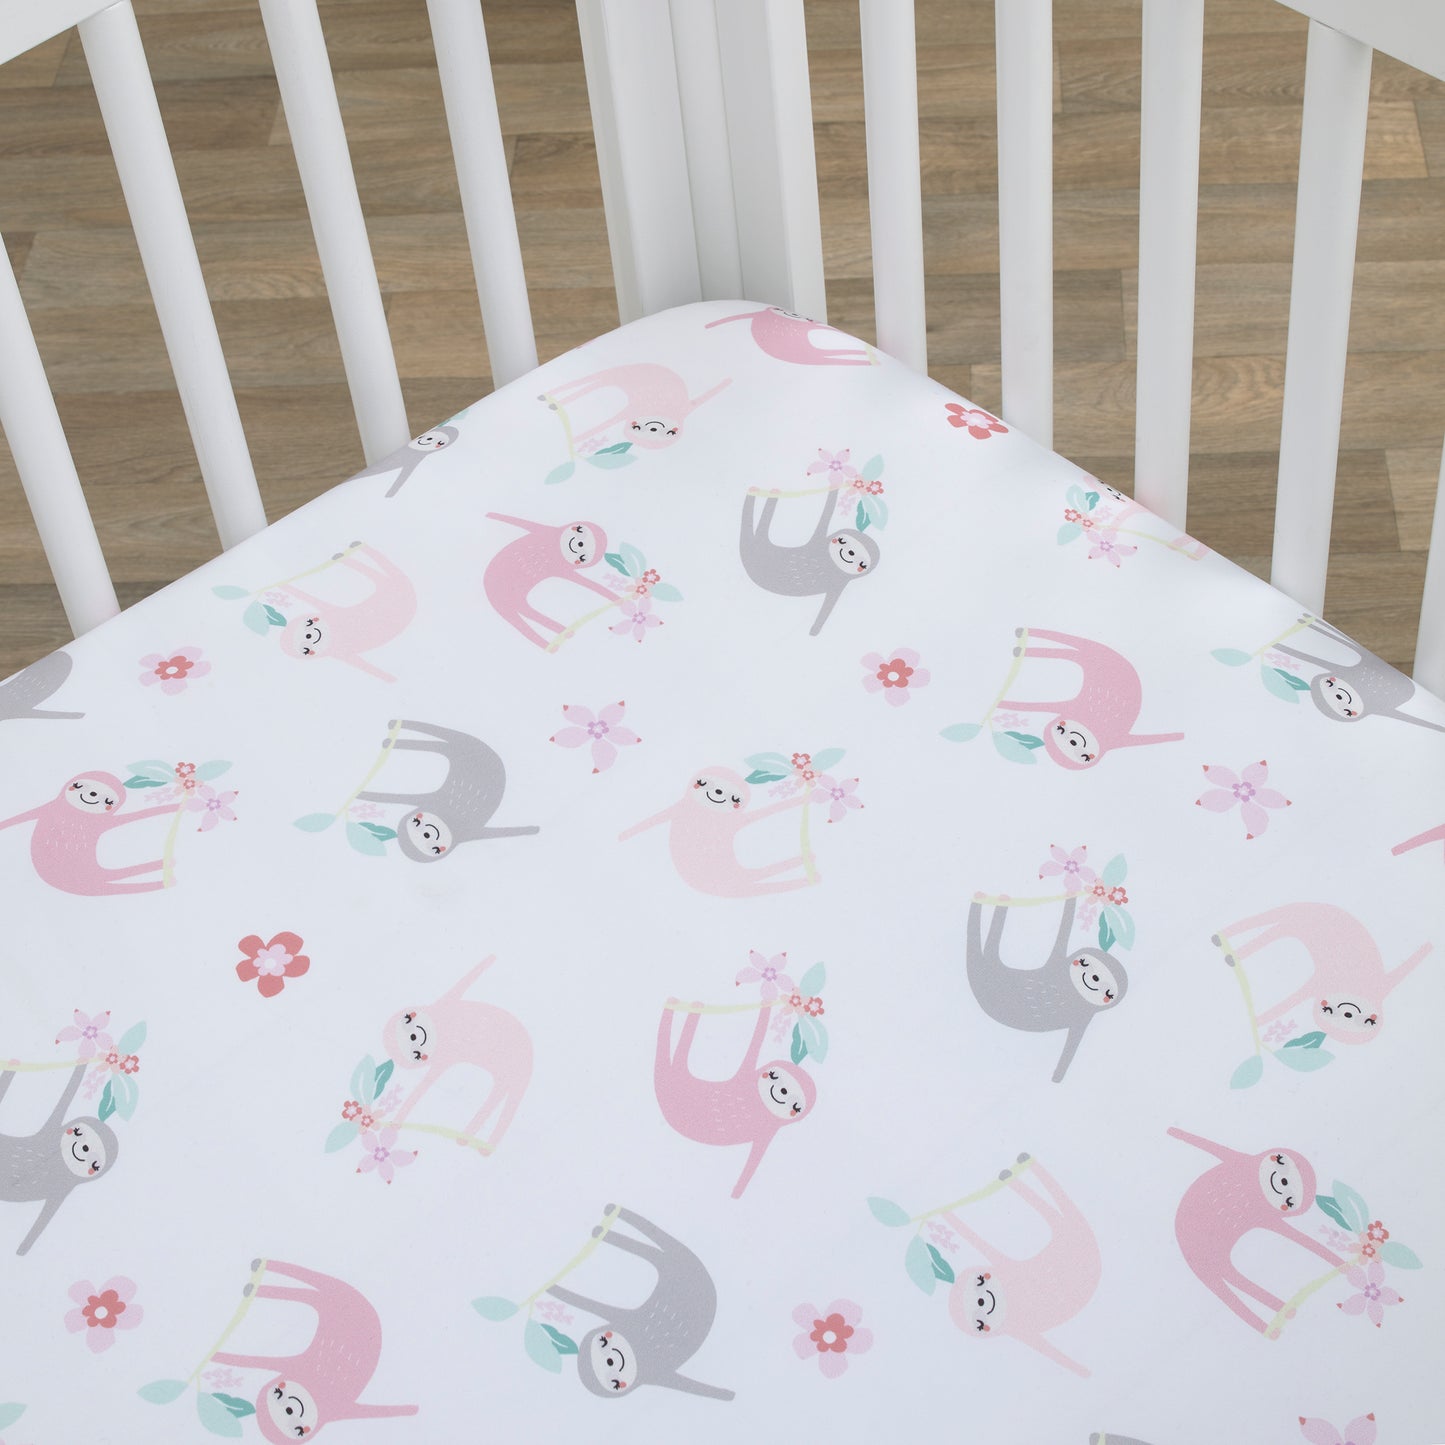 Little Love by NoJo Tropical Garden Pink, Grey, and White Sloth Super Soft Fitted Crib Sheet